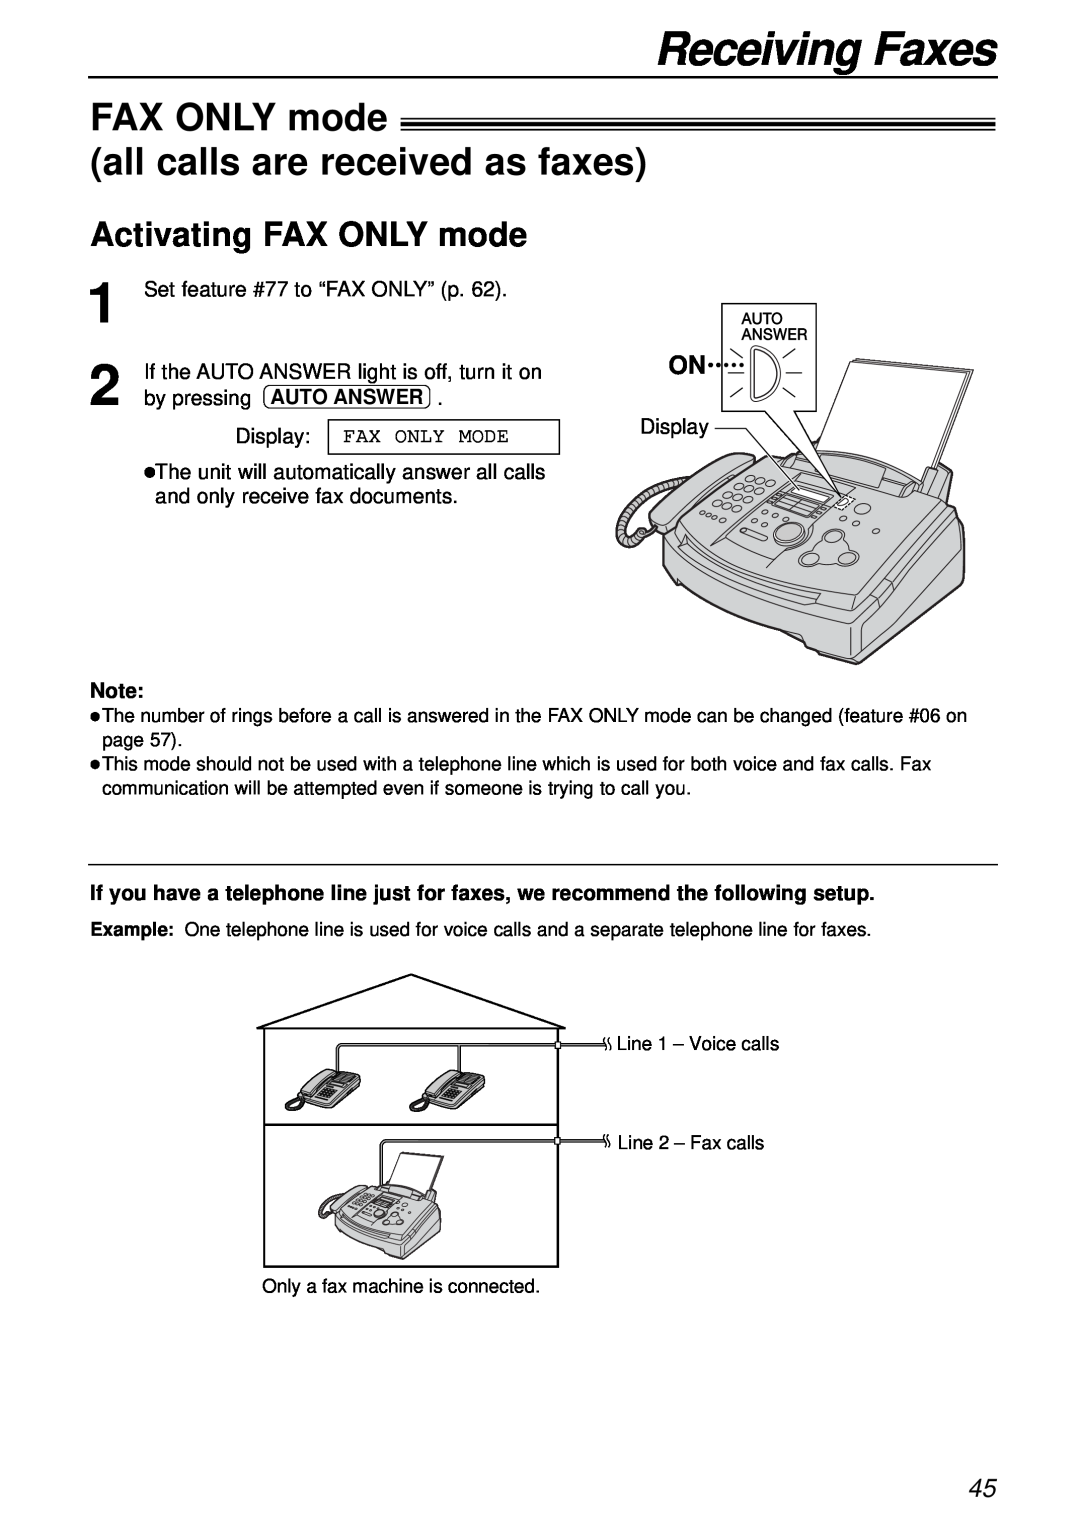 Panasonic KX-FL501NZ, KX-FL501AL FAX ONLY mode all calls are received as faxes, Activating FAX ONLY mode, Receiving Faxes 